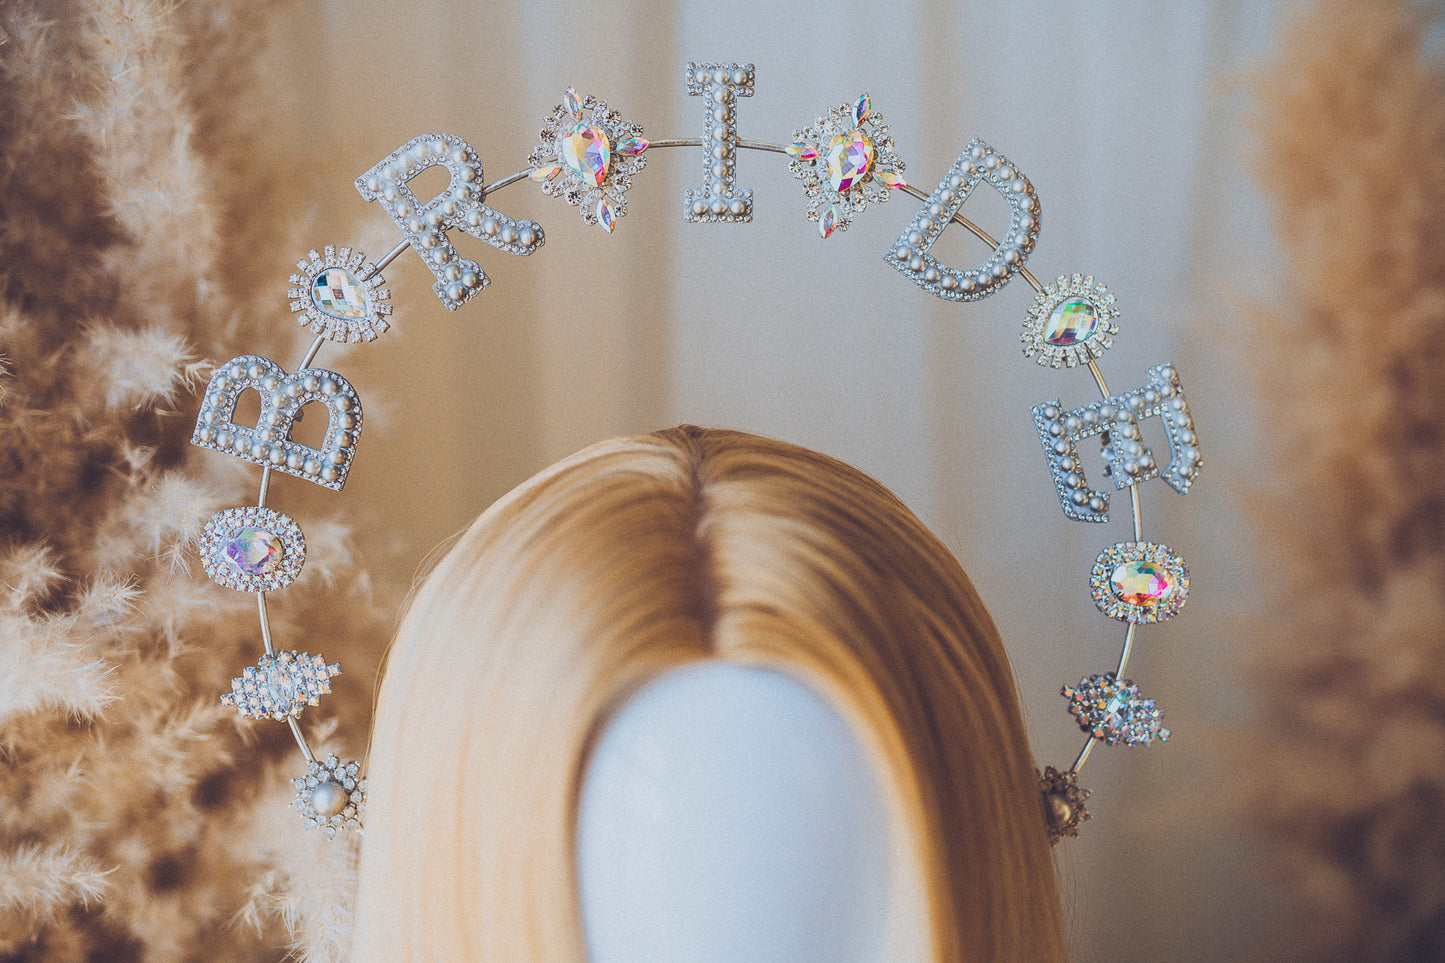 Bride To Be Halo Crown